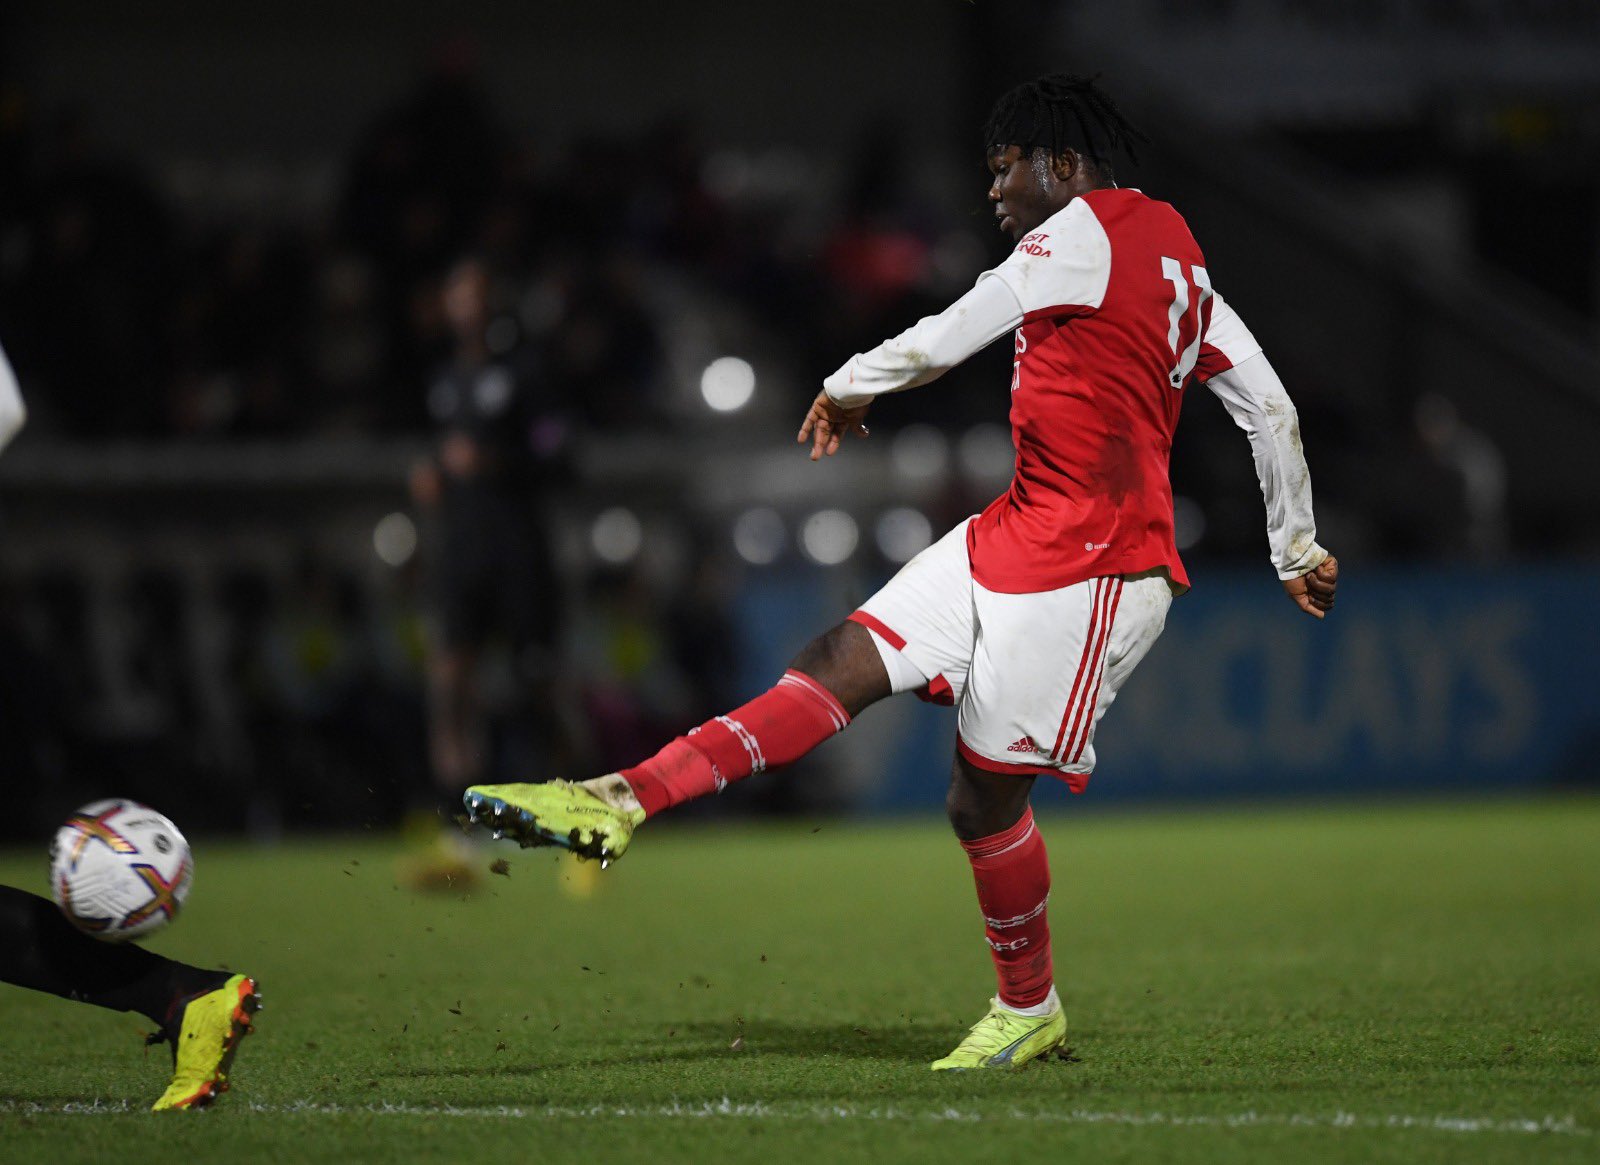 Released Arsenal winger holds trial with Eredivisie club